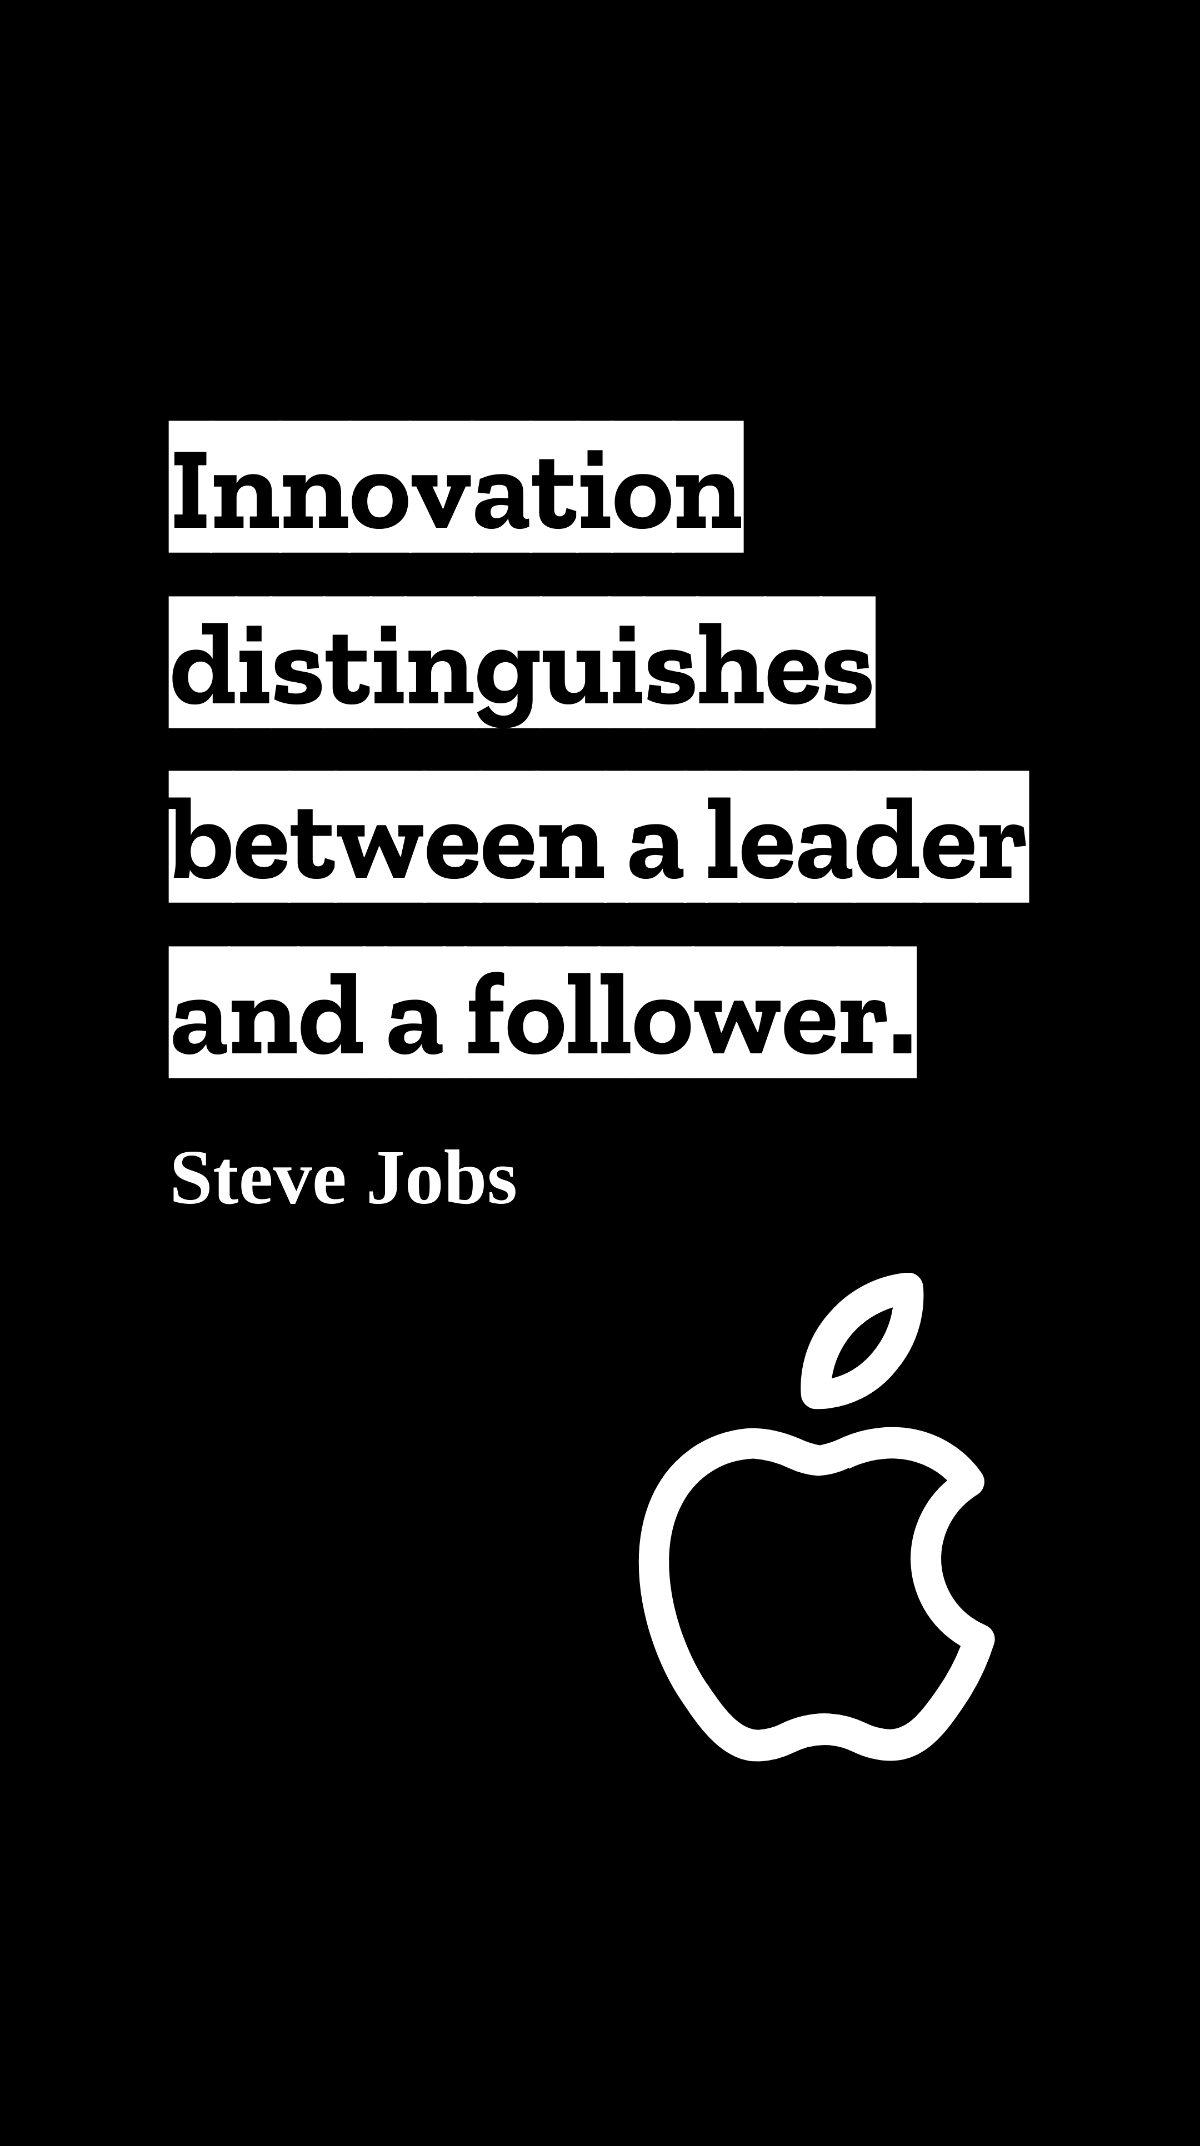 Steve Jobs - Innovation distinguishes between a leader and a follower. Template